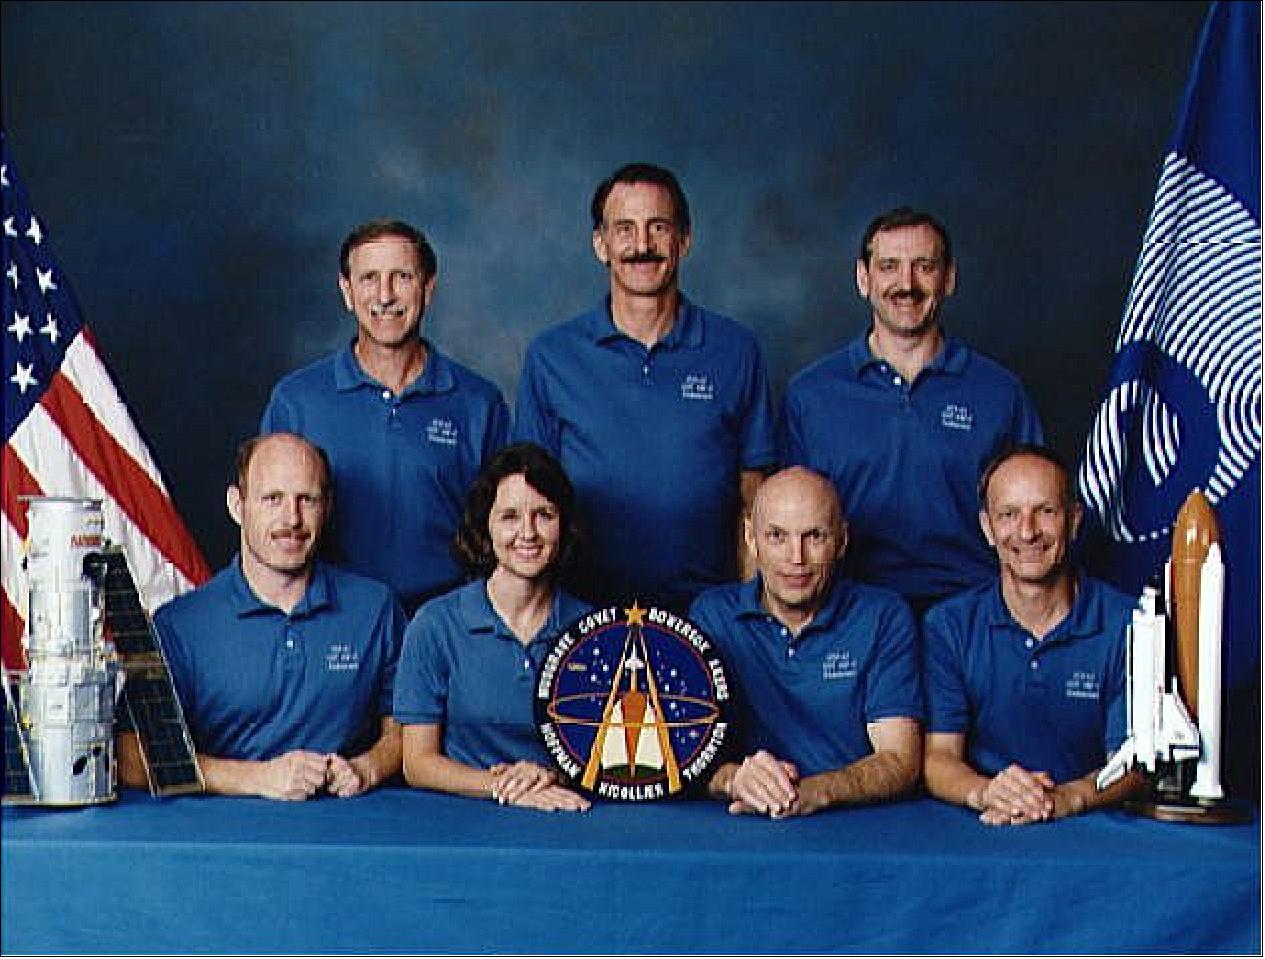 Figure 53: STS-61 Crew photo with Commander Richard O. Covey, Pilot Kenneth D. Bowersox, Payload Commander F. Story Musgrave and Mission Specialists Kathryn C. Thornton, Claude Nicollier, Jeffrey A. Hoffman and Tom Akers (image credit: NASA)